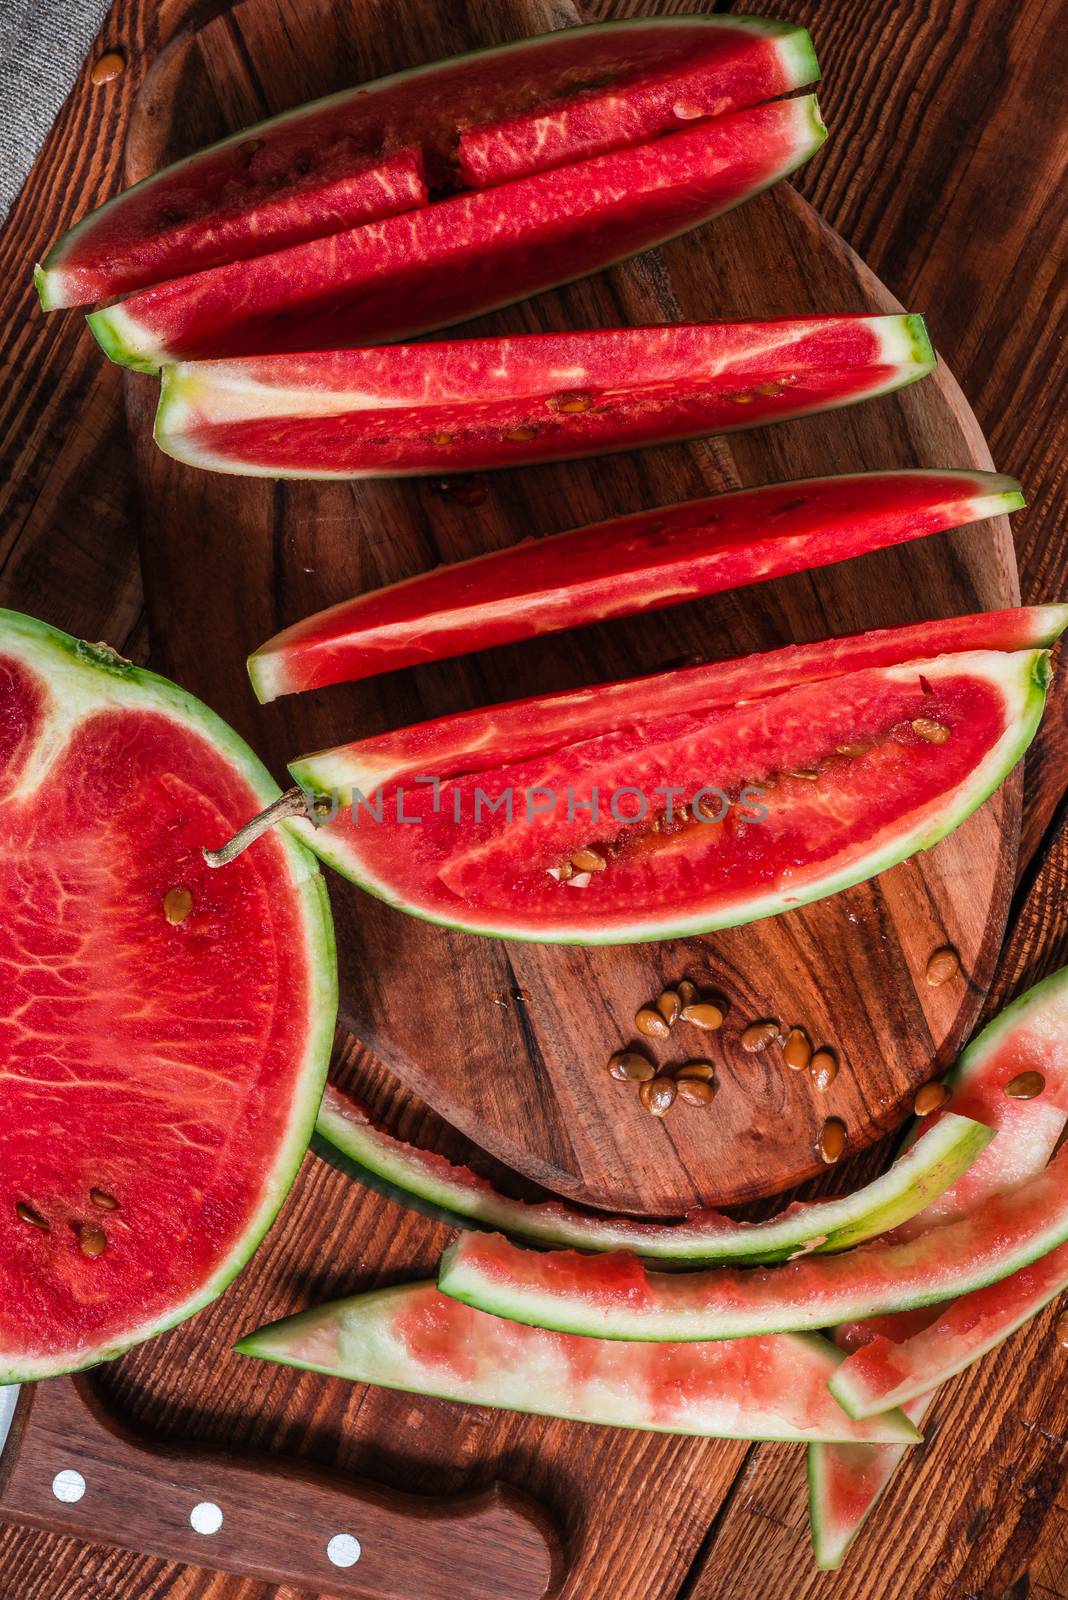 Watermelon slices and peels lying on the board by Seva_blsv